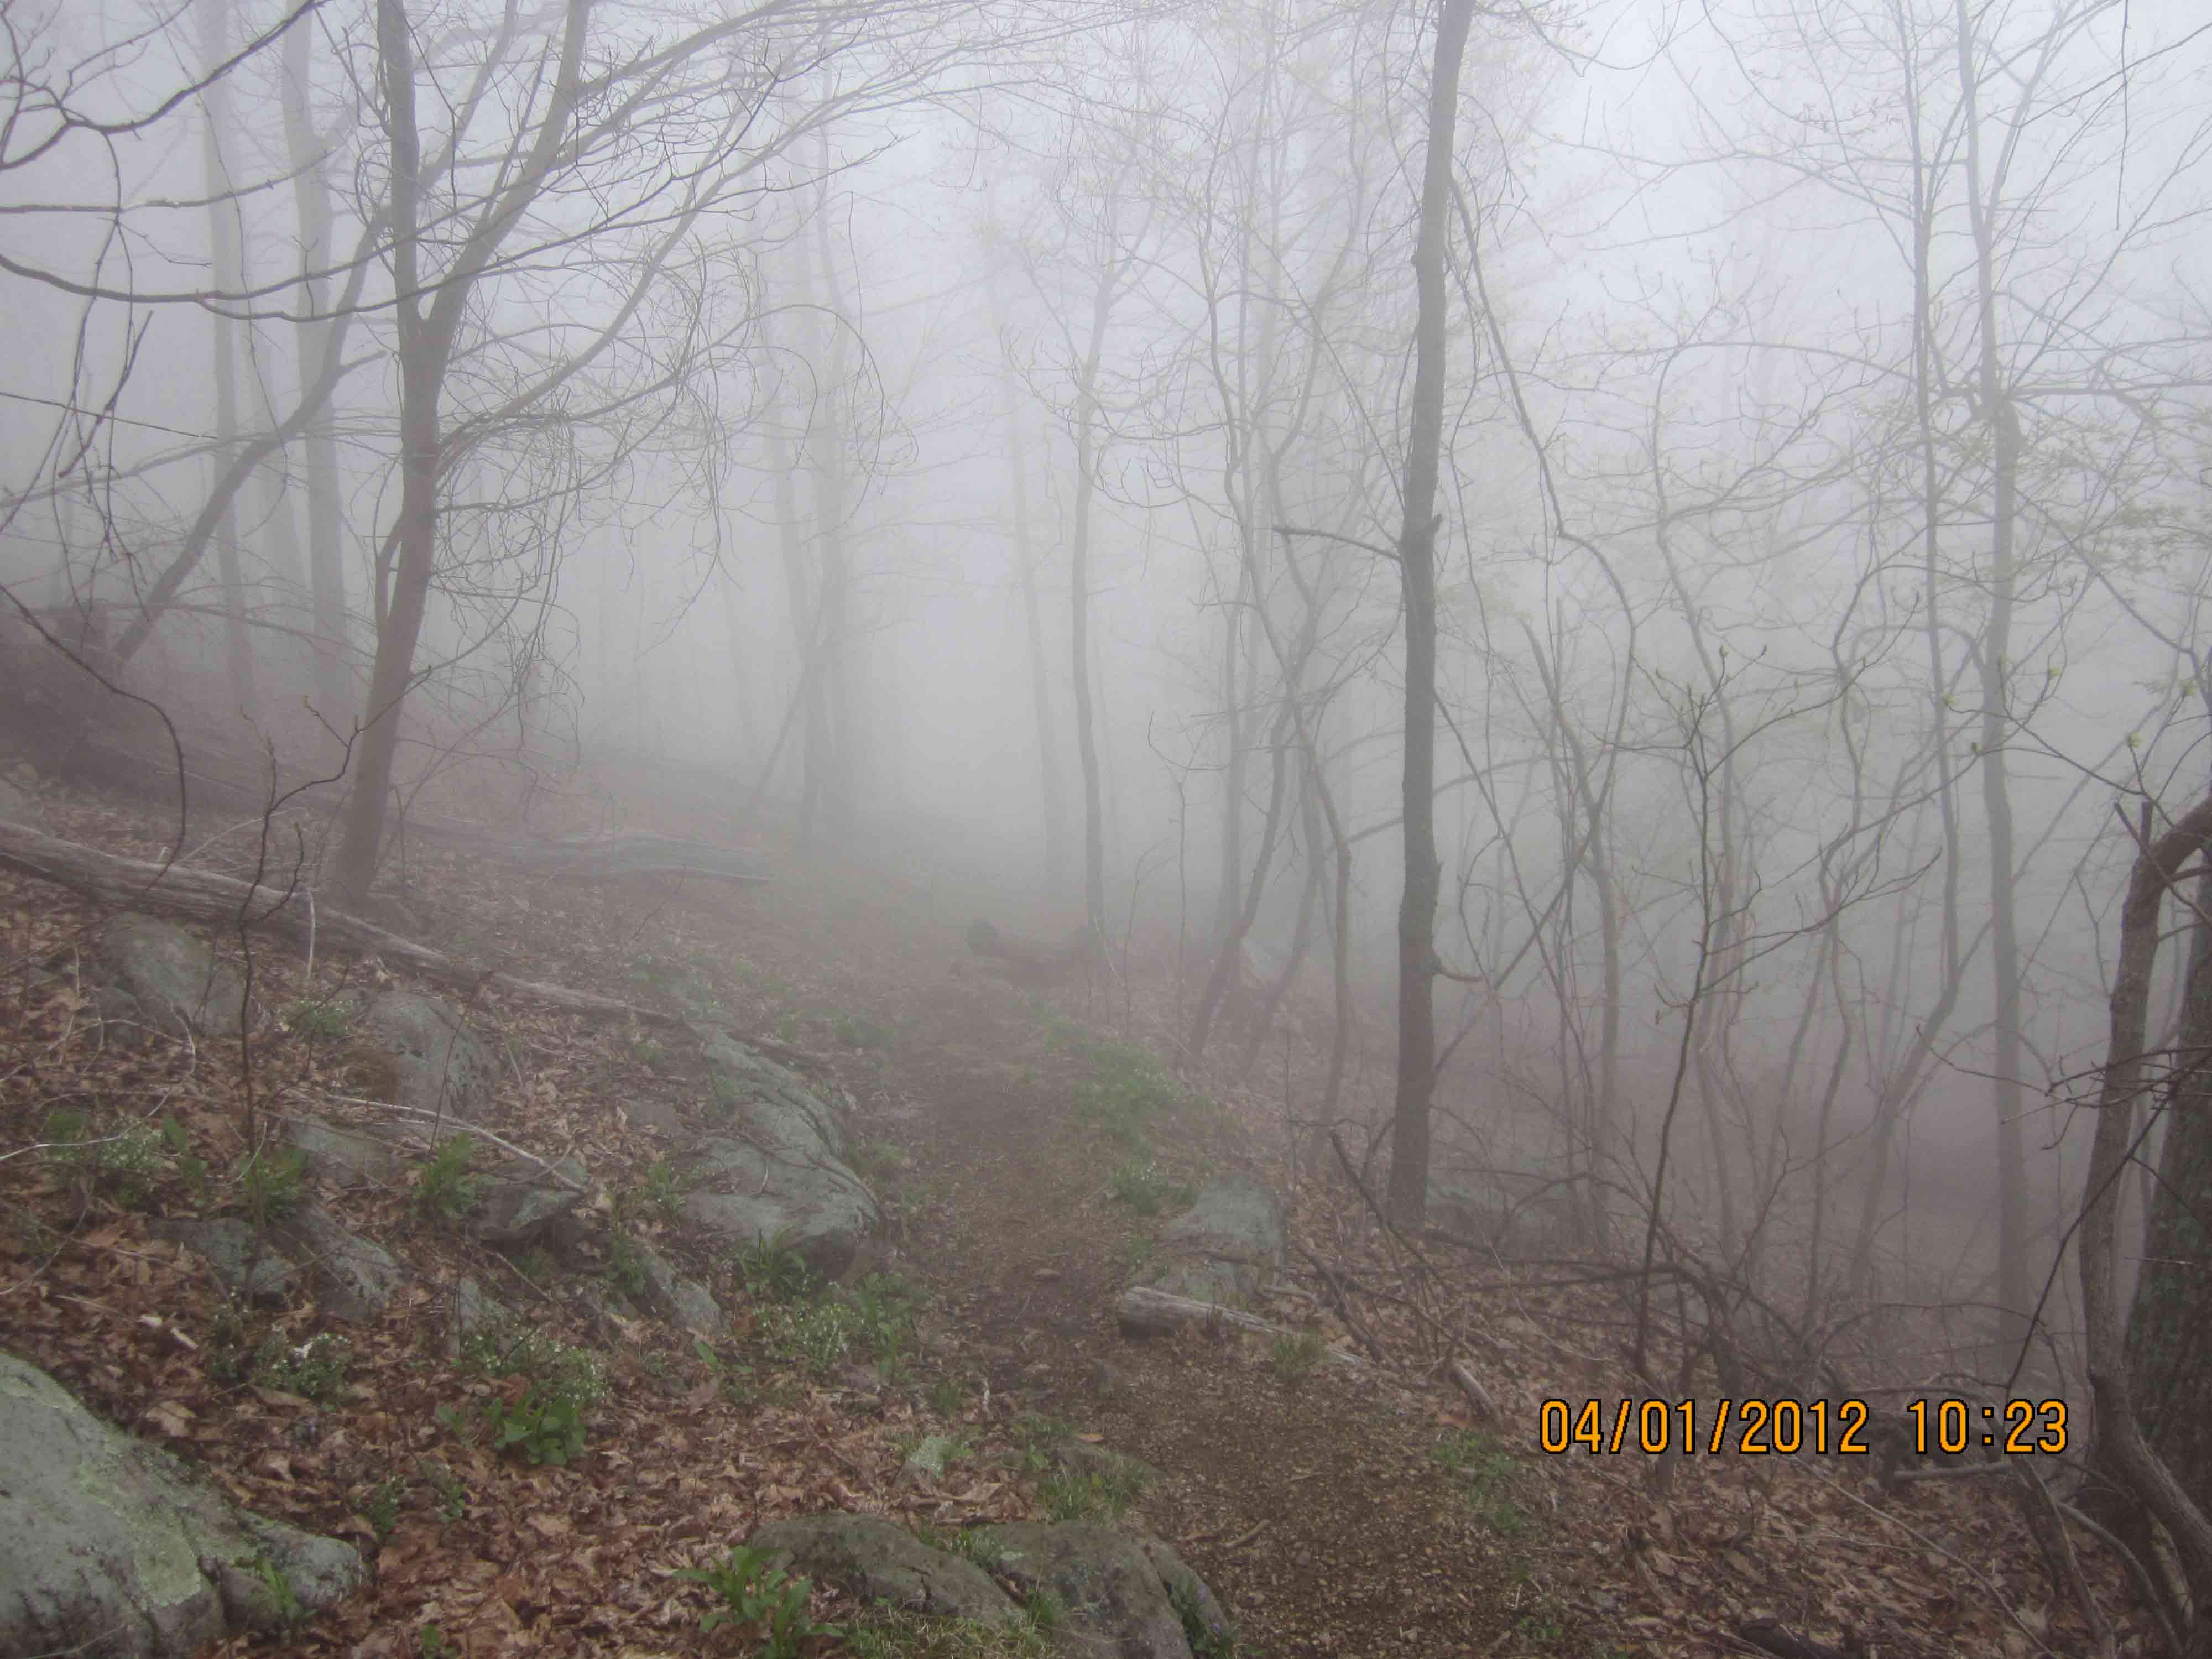 mm 1.9 - Ascent of the priest in a cloud cover  Courtesy fullcount.tom@gmail.com